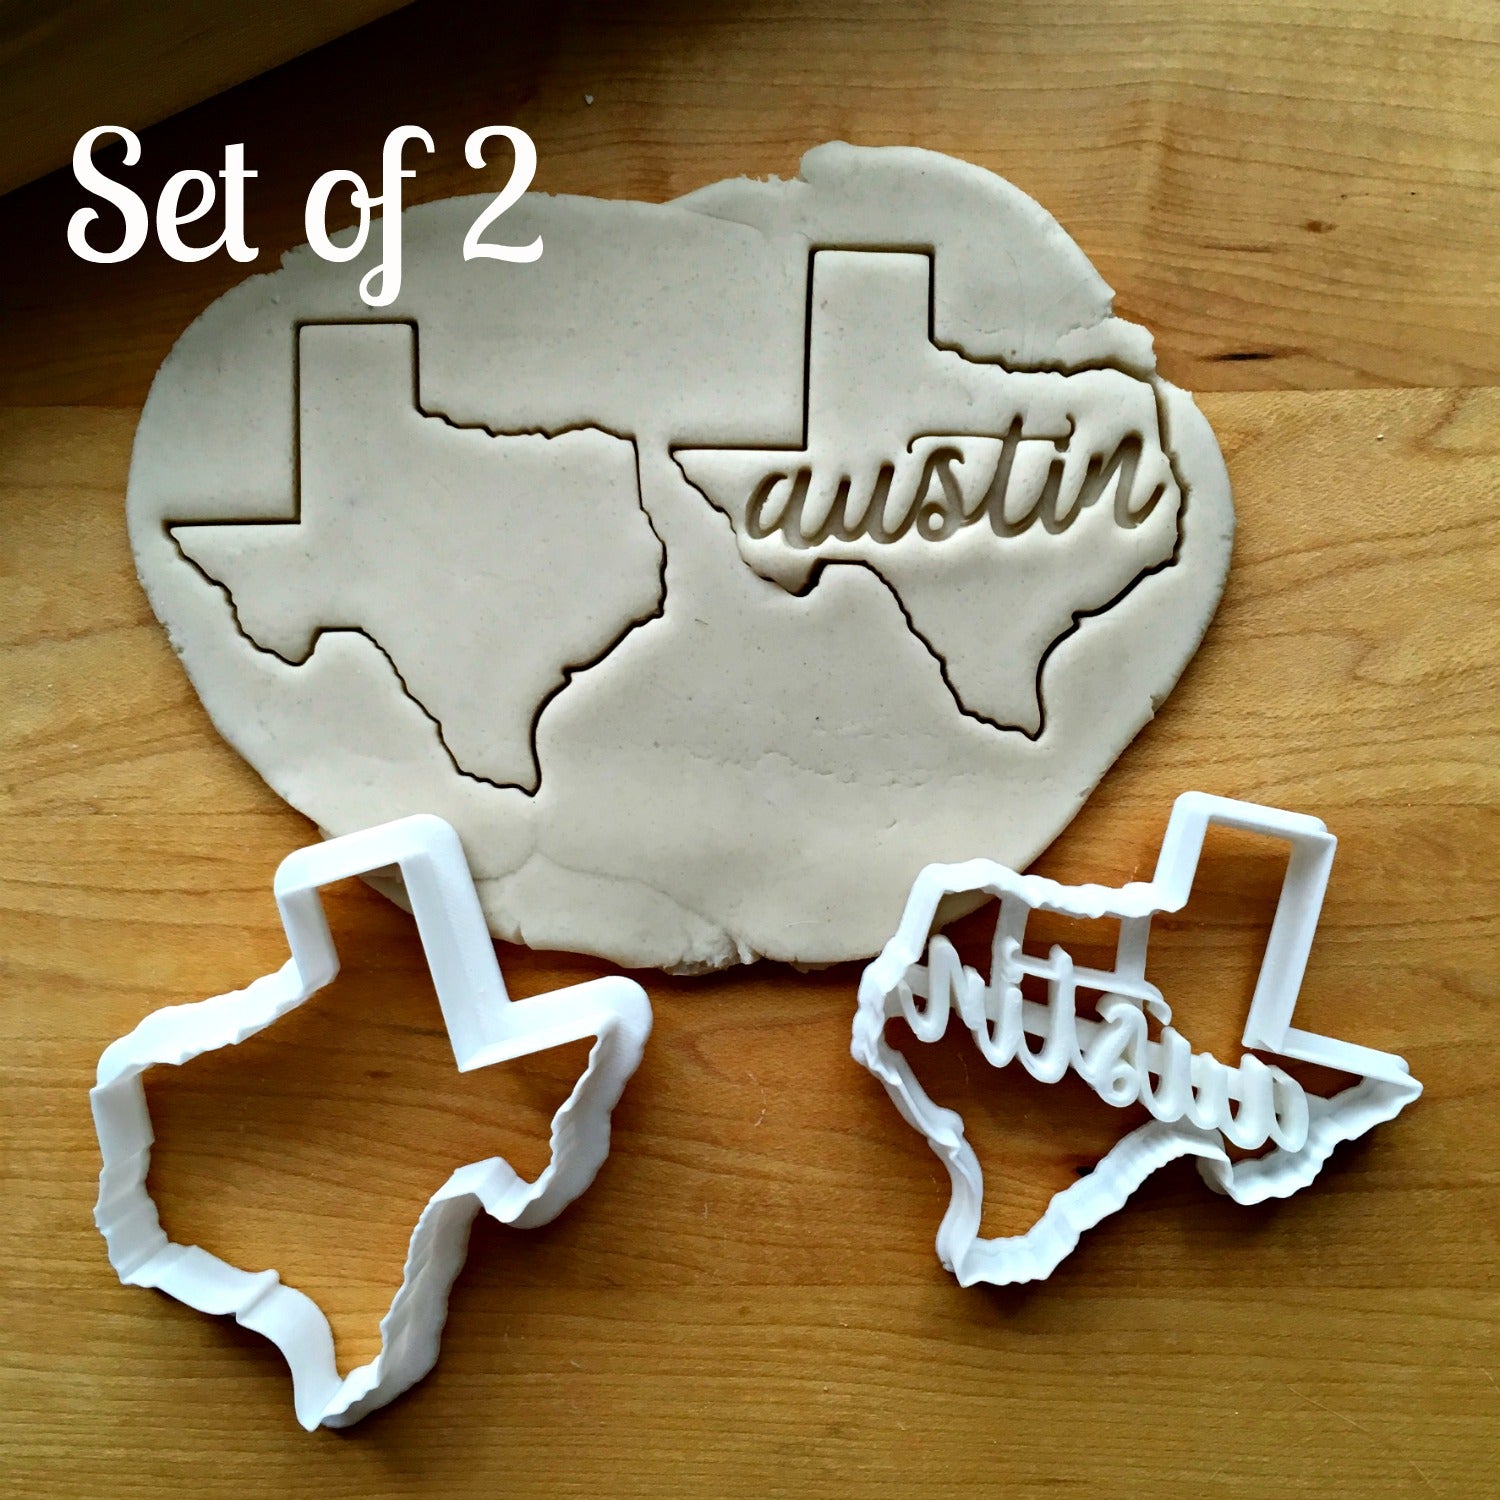 Set of 2 Austin Texas Cookie Cutters/Dishwasher Safe